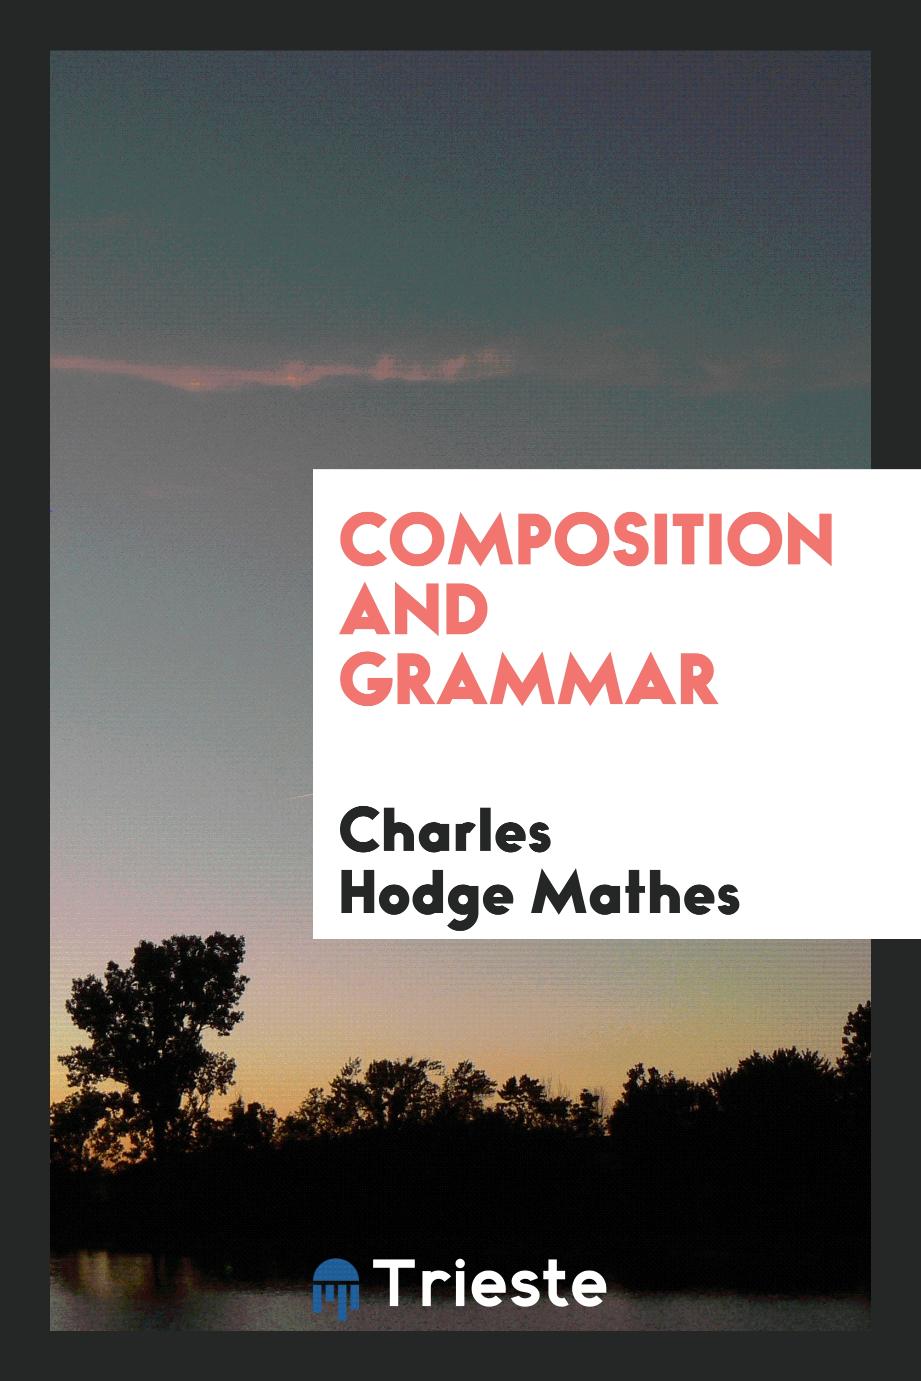 Composition and grammar